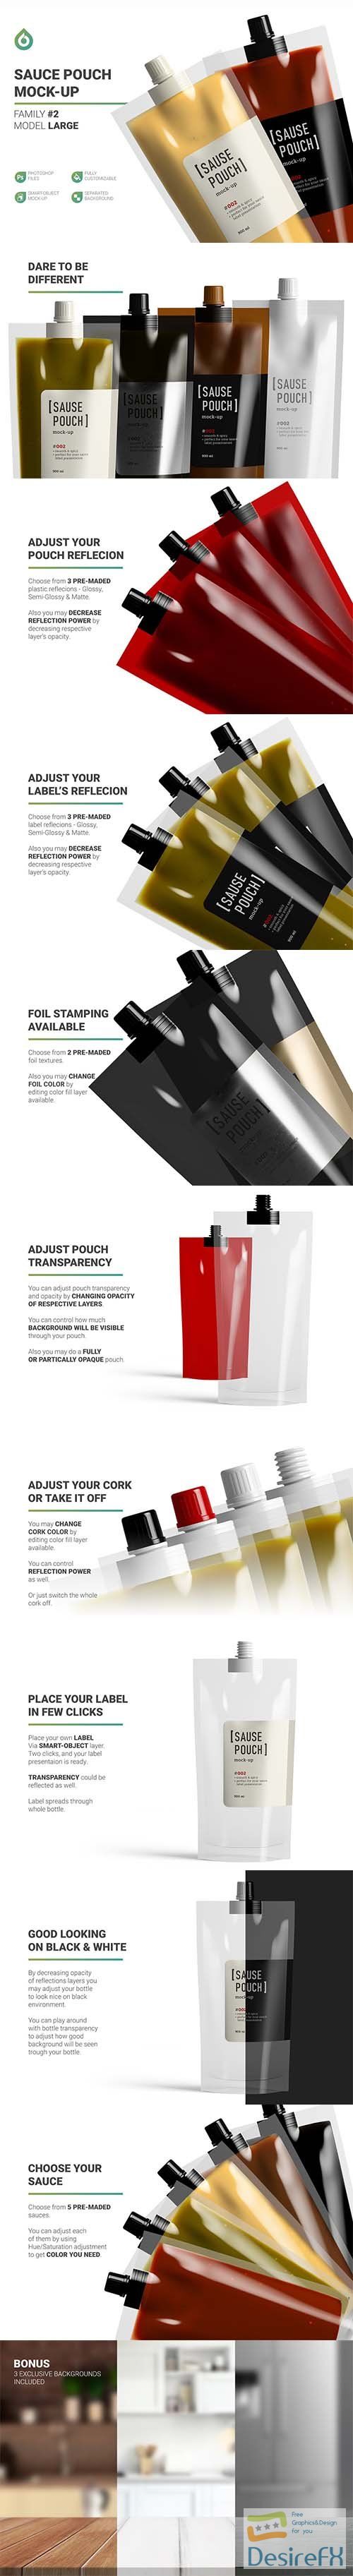 CreativeMarket - Sauce Doypack Pouch Mockup 5704035